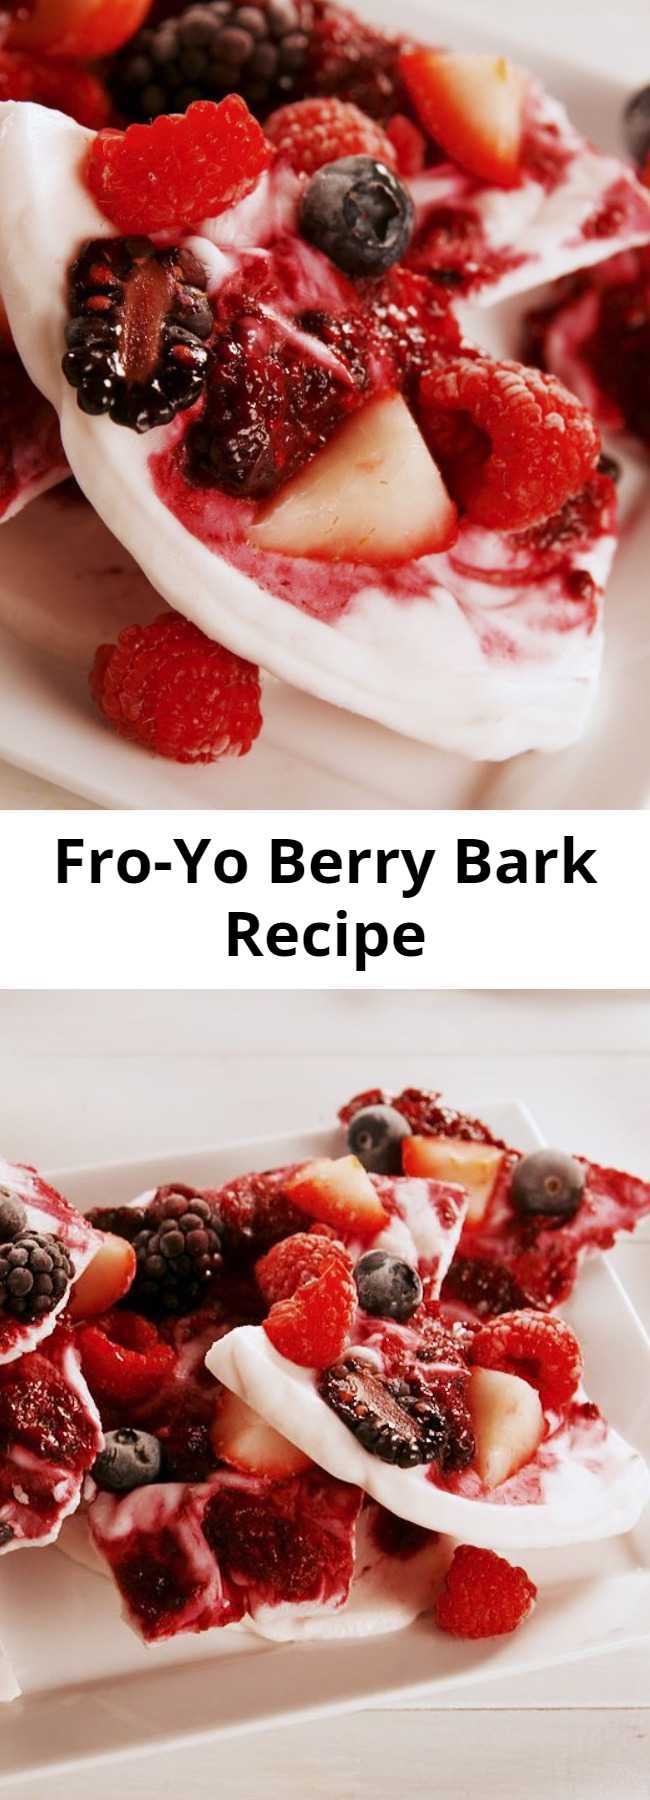 Fro-Yo Berry Bark Recipe - Short on time? These are a BREEZE. This berrylicious snack takes no time to prep, and the thin, creamy layer of Two Good™ Greek low-fat yogurt freezes just in time for you to snack and share. These decadent strawberry desserts will have you dreaming of summer.